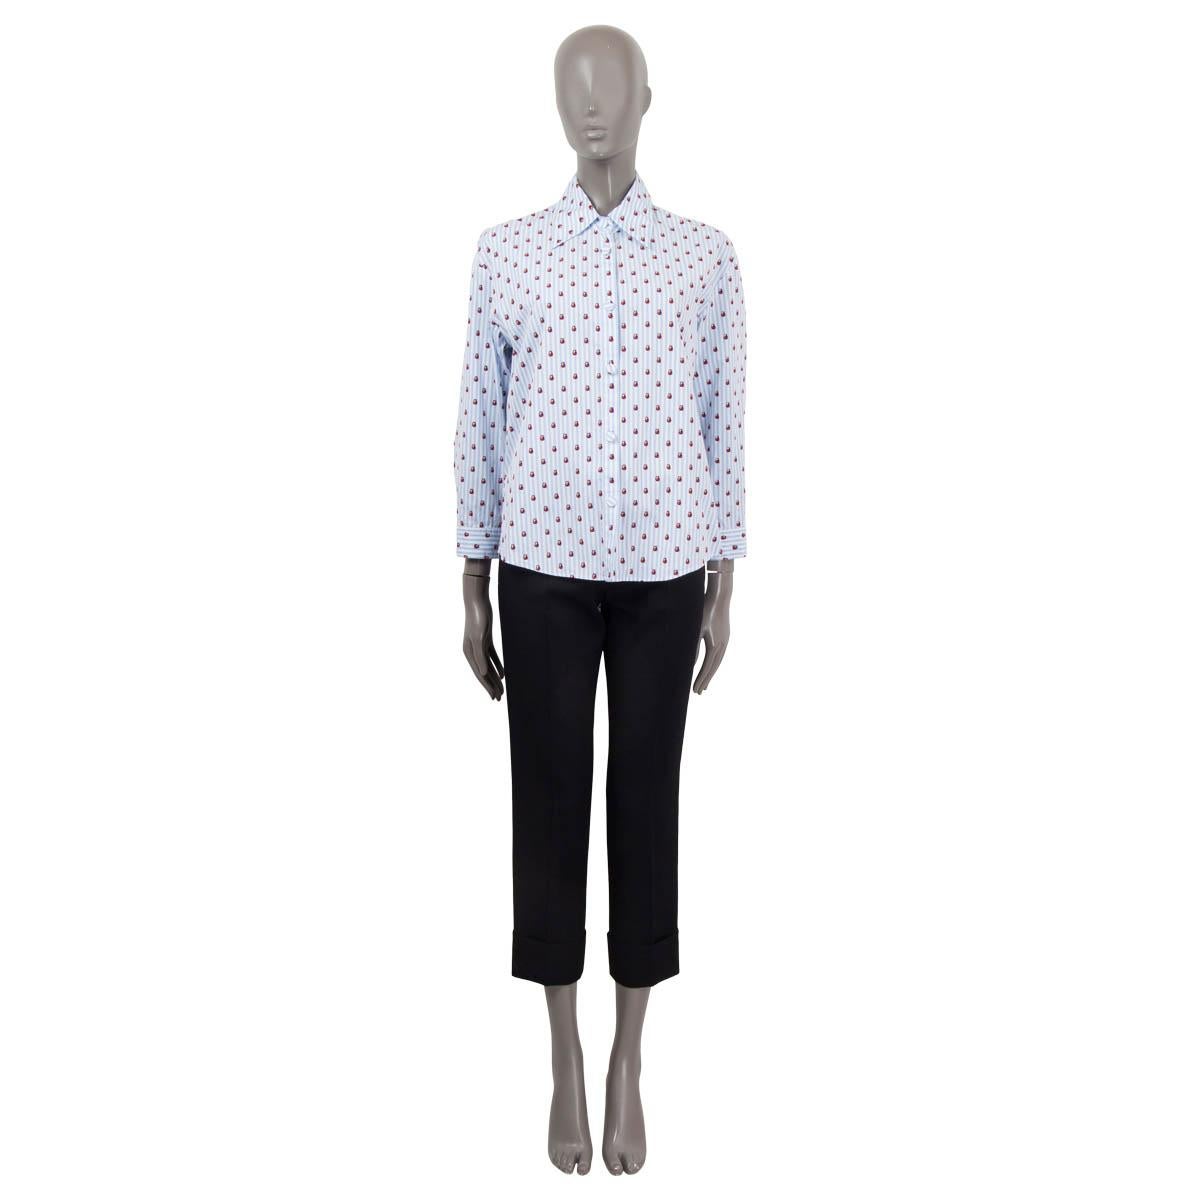 100% authentic Gucci ladybug button-up shirt in blue and white stripped cotton poplin (100%) and details in red and black. Features buttoned cuffs and a point collar. Closes with fabric covered buttons. Unlined. Has been worn and is in excellent